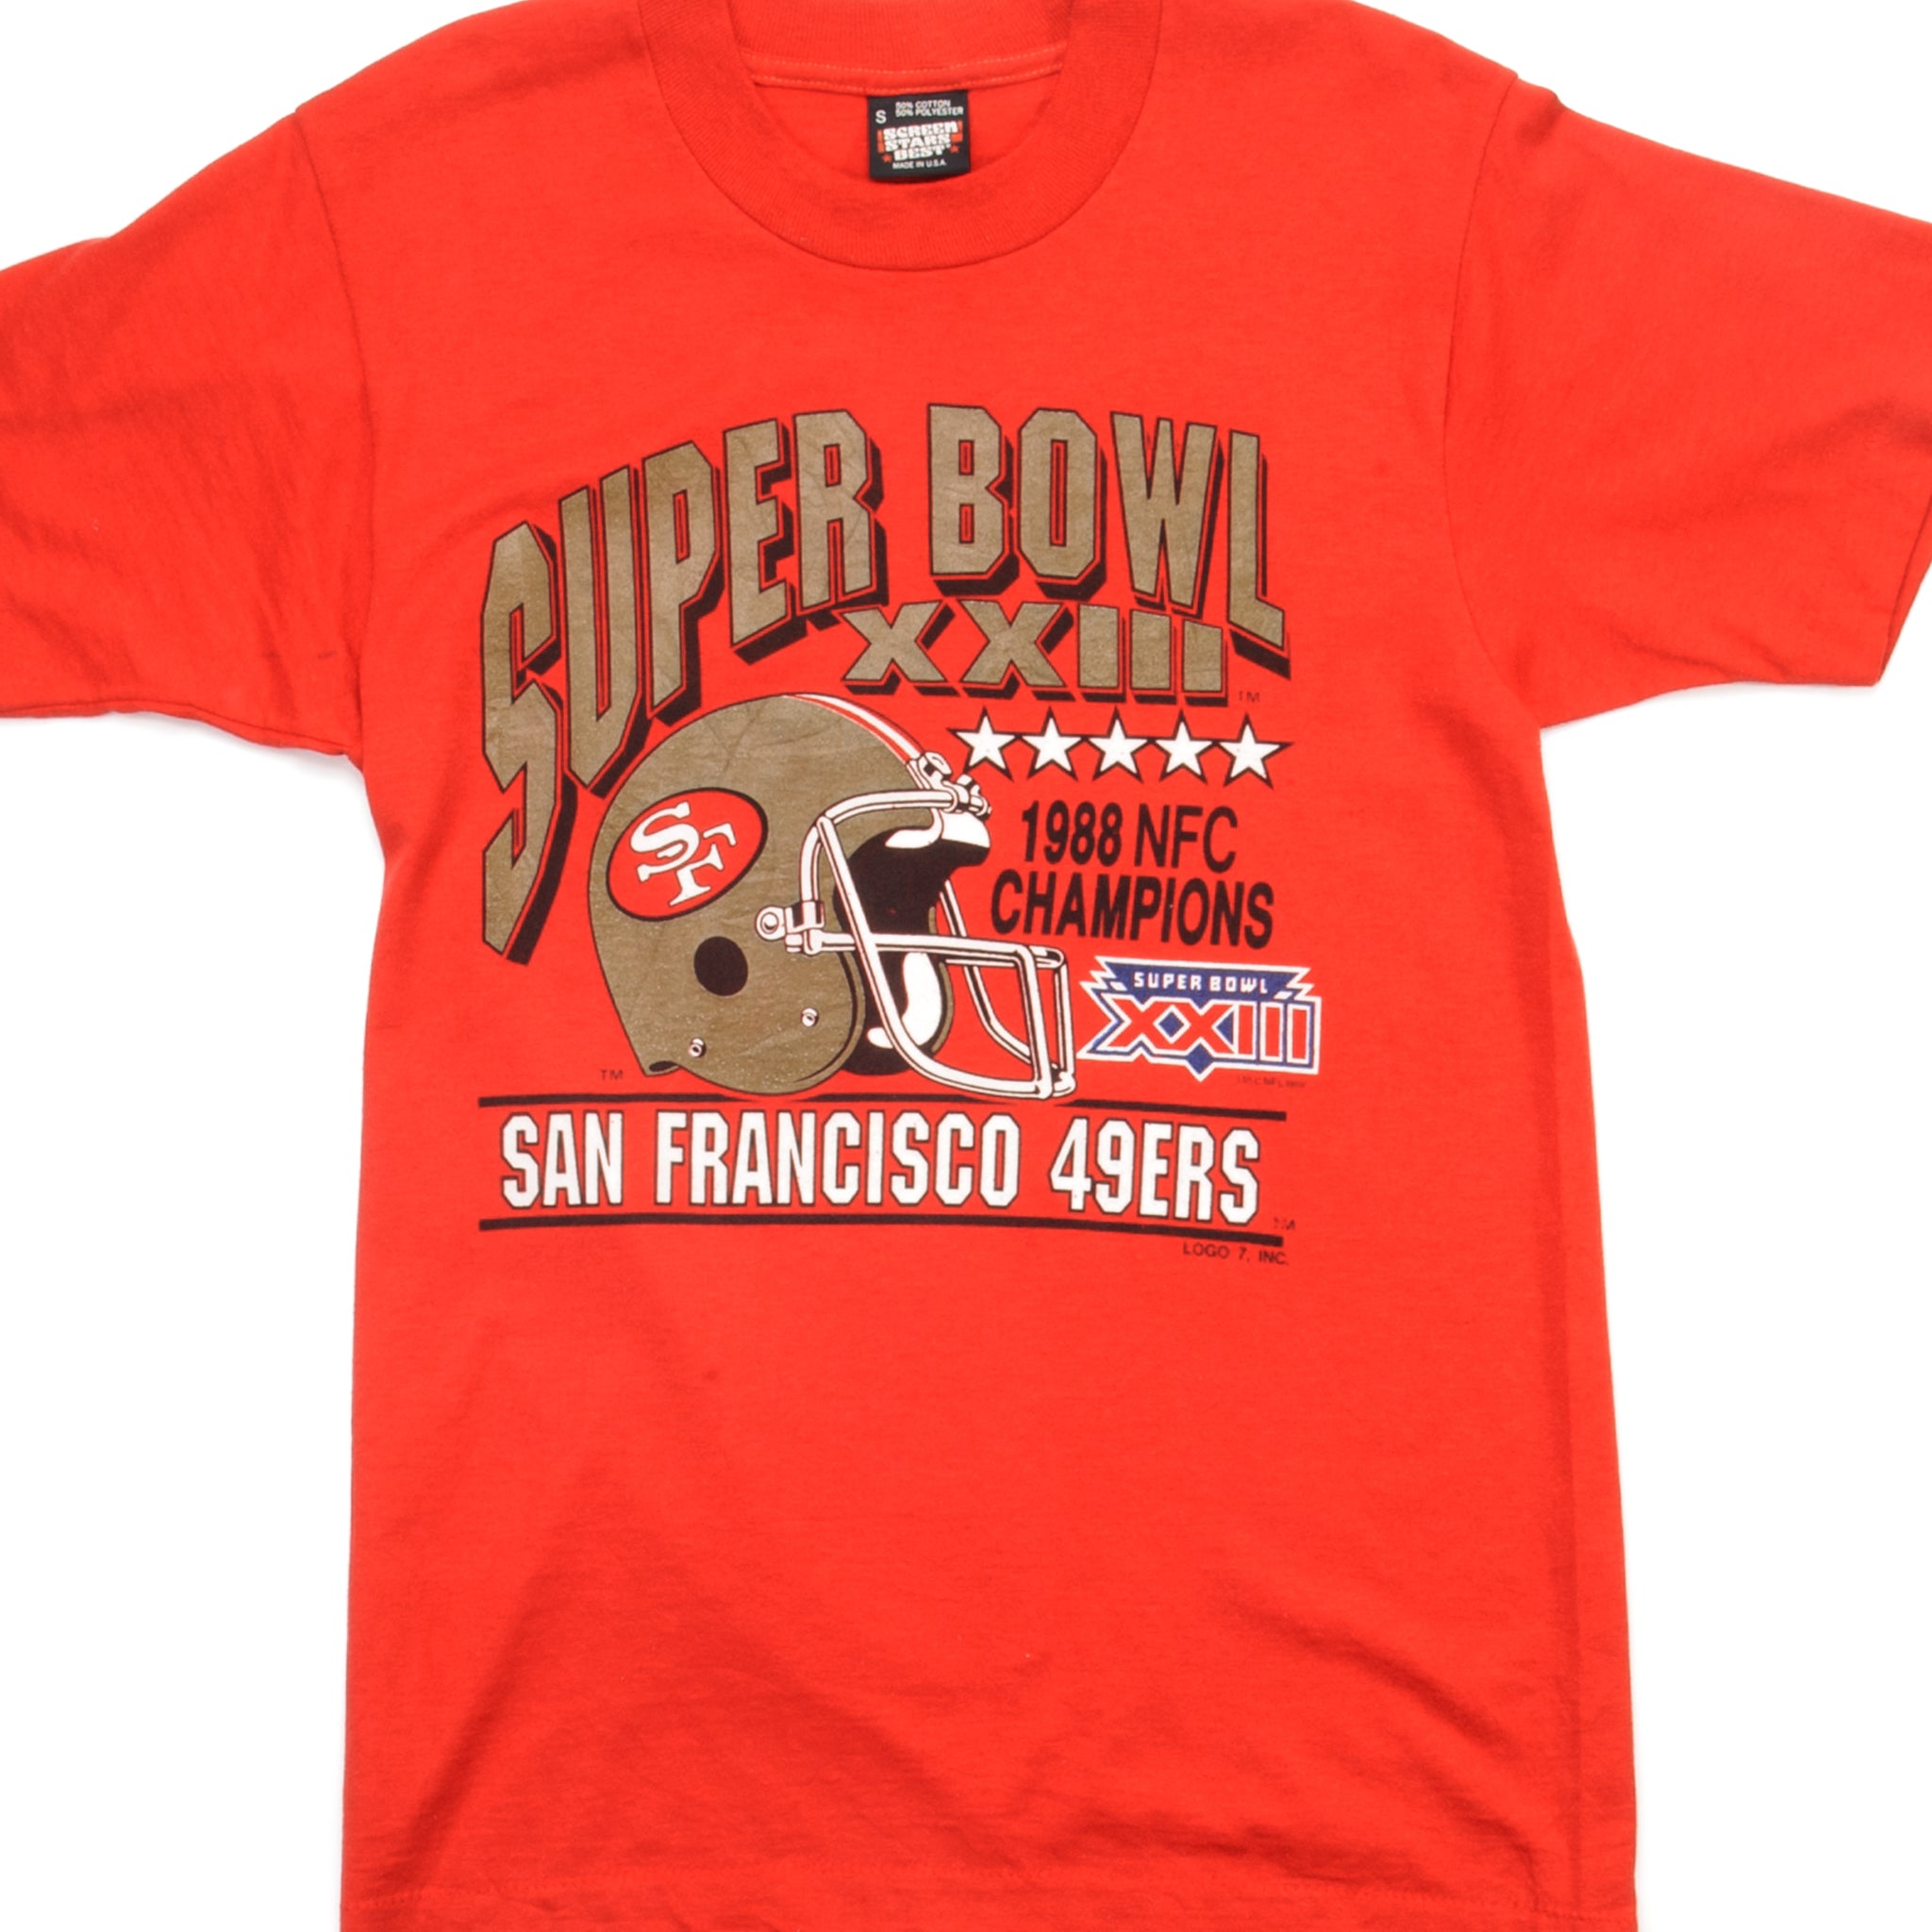 Sports / College Vintage NFL San Francisco 49ers Tee Shirt 1988 Size Xs Made in USA Deadstock